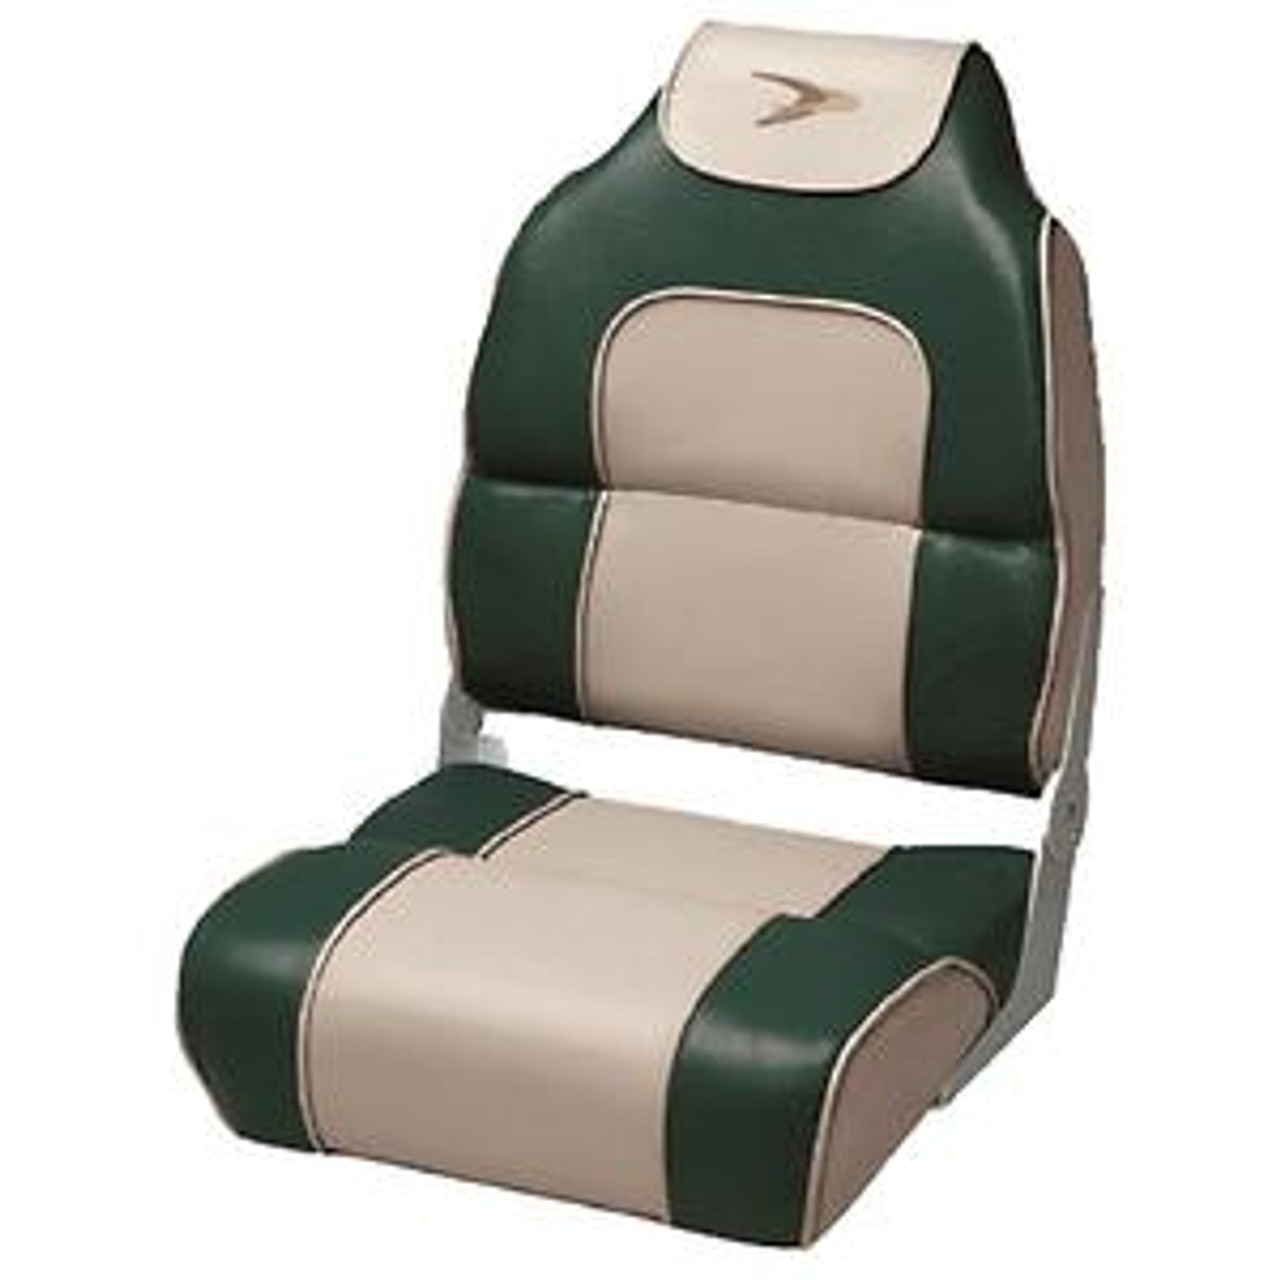 Aftermarket New Wise Seating Deluxe High-Back, 144-8WD258PLS802